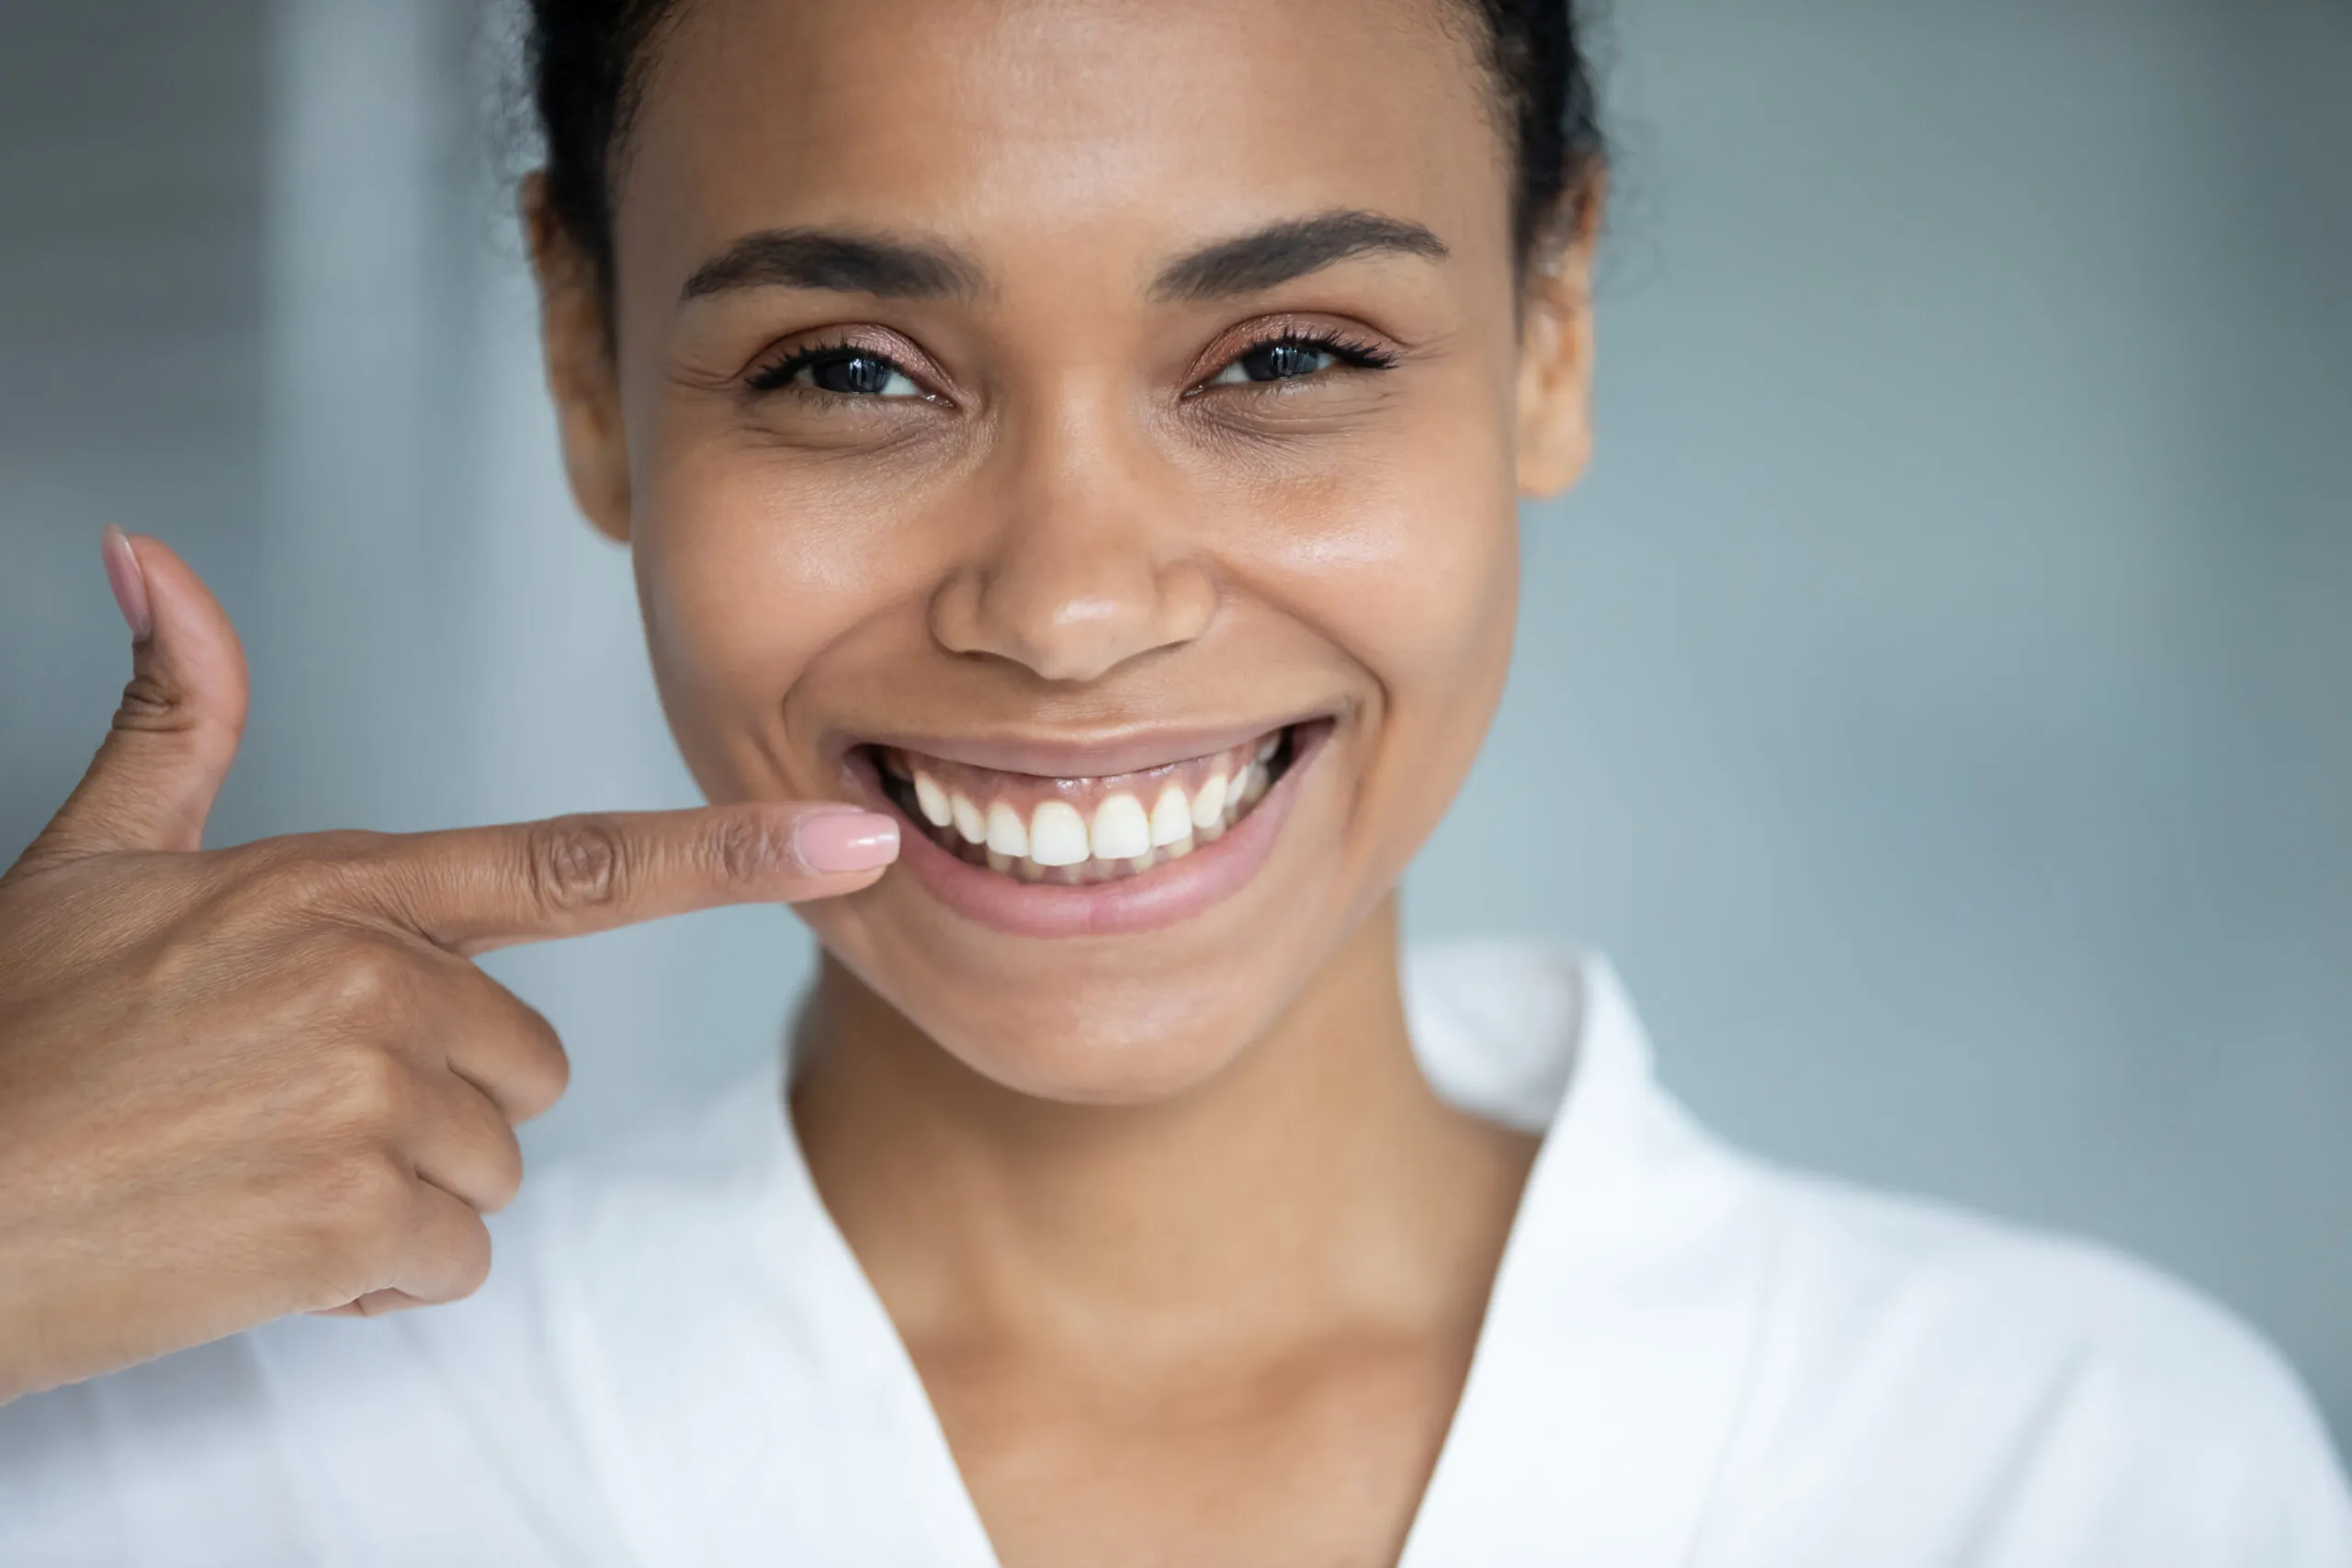 Is Teeth Straightening Right For You?